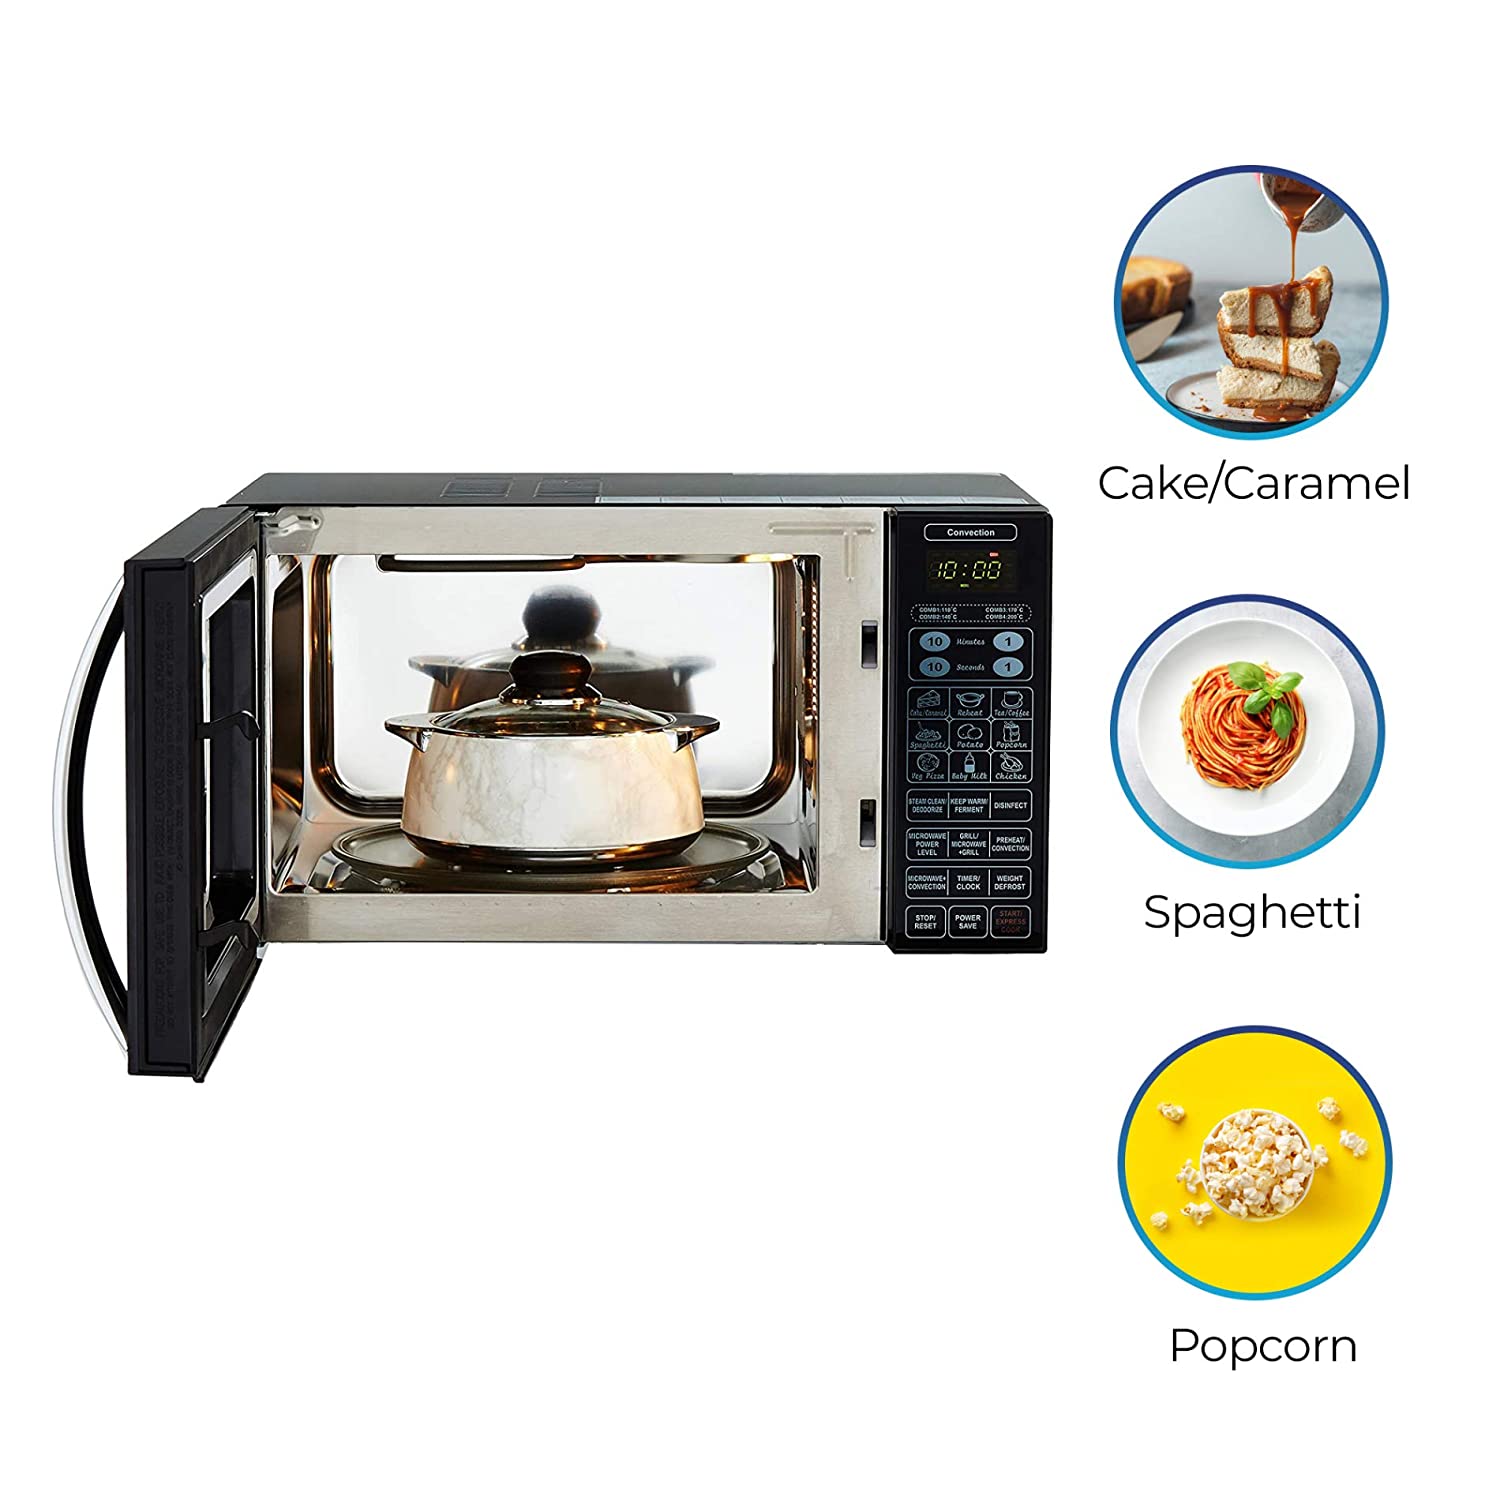 IFB 23BC4 23 L Convection Microwave Oven